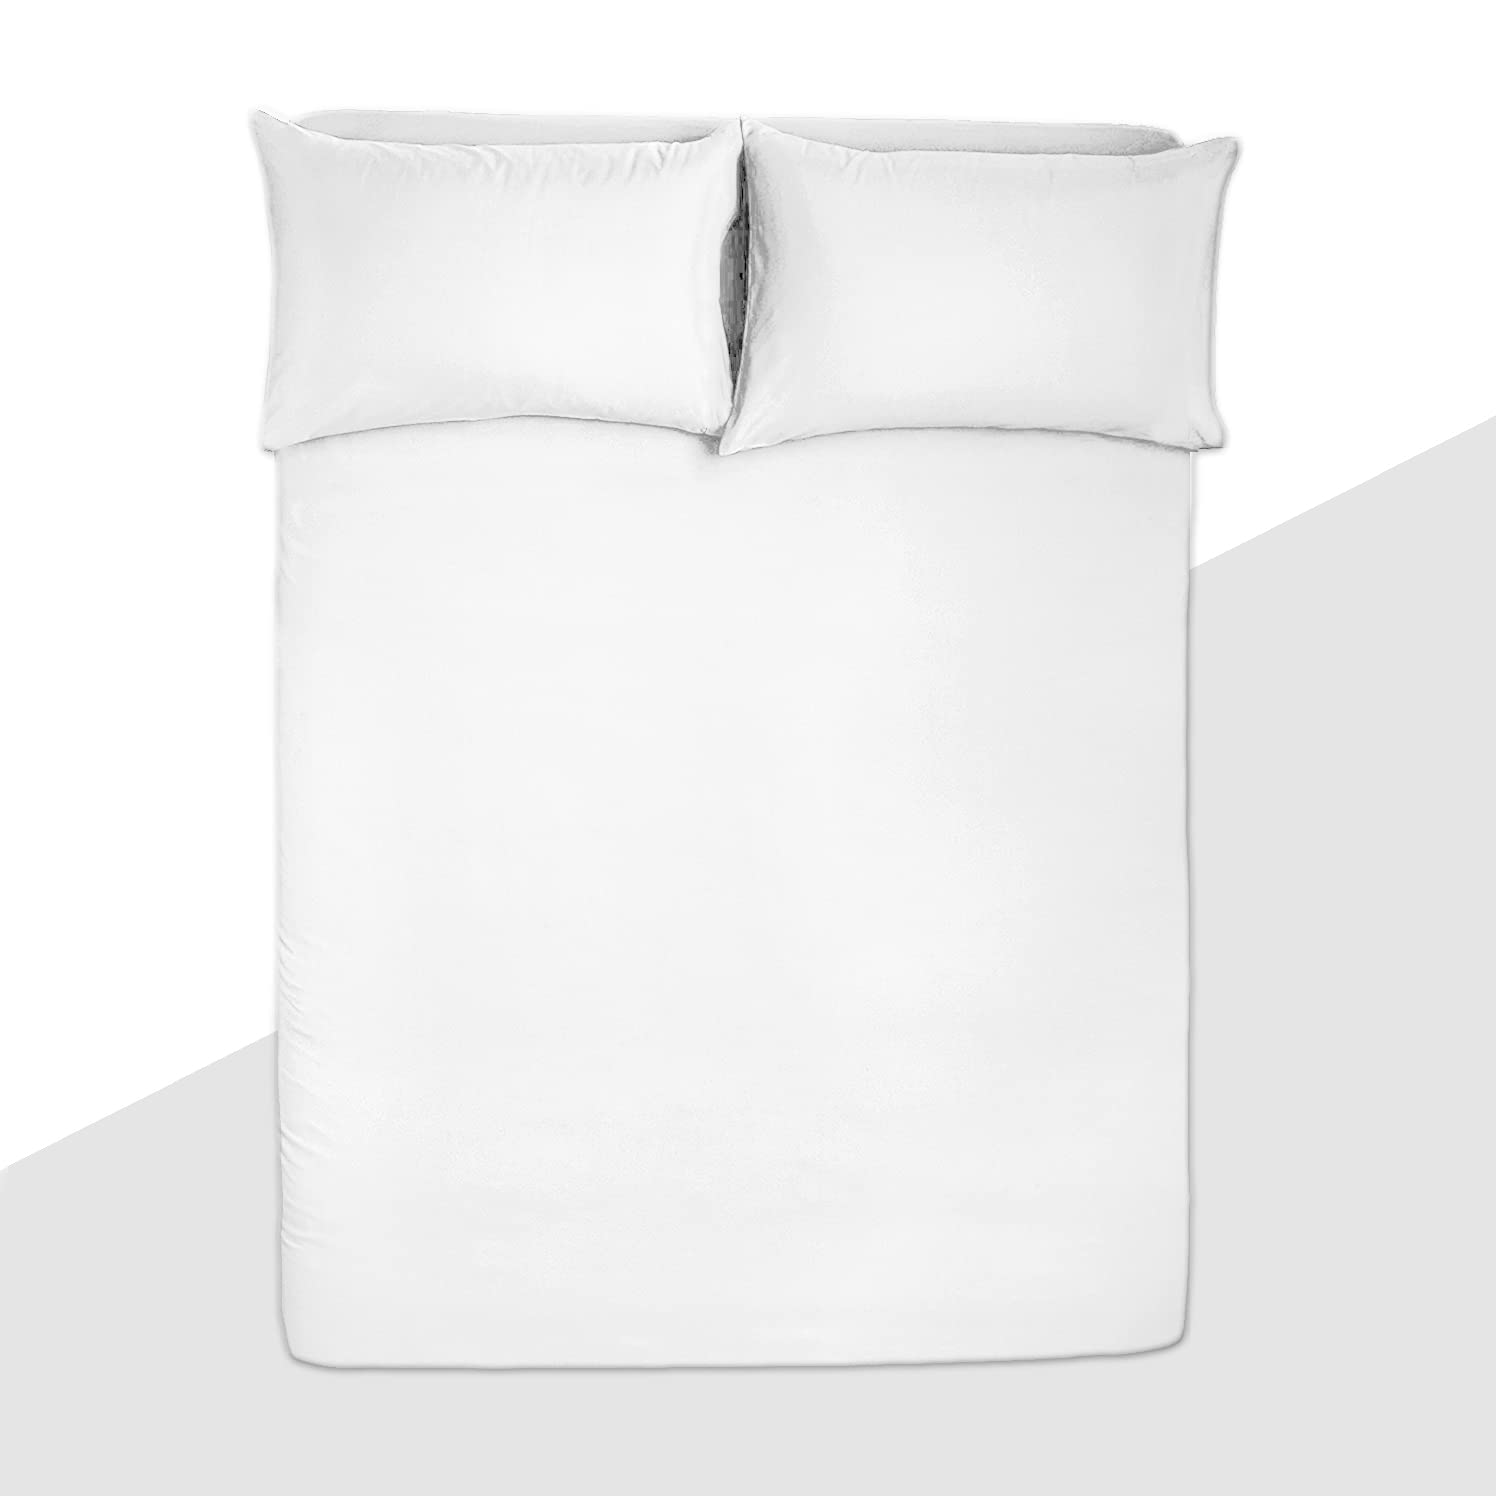 Bedsheet Single / Double Bed, White